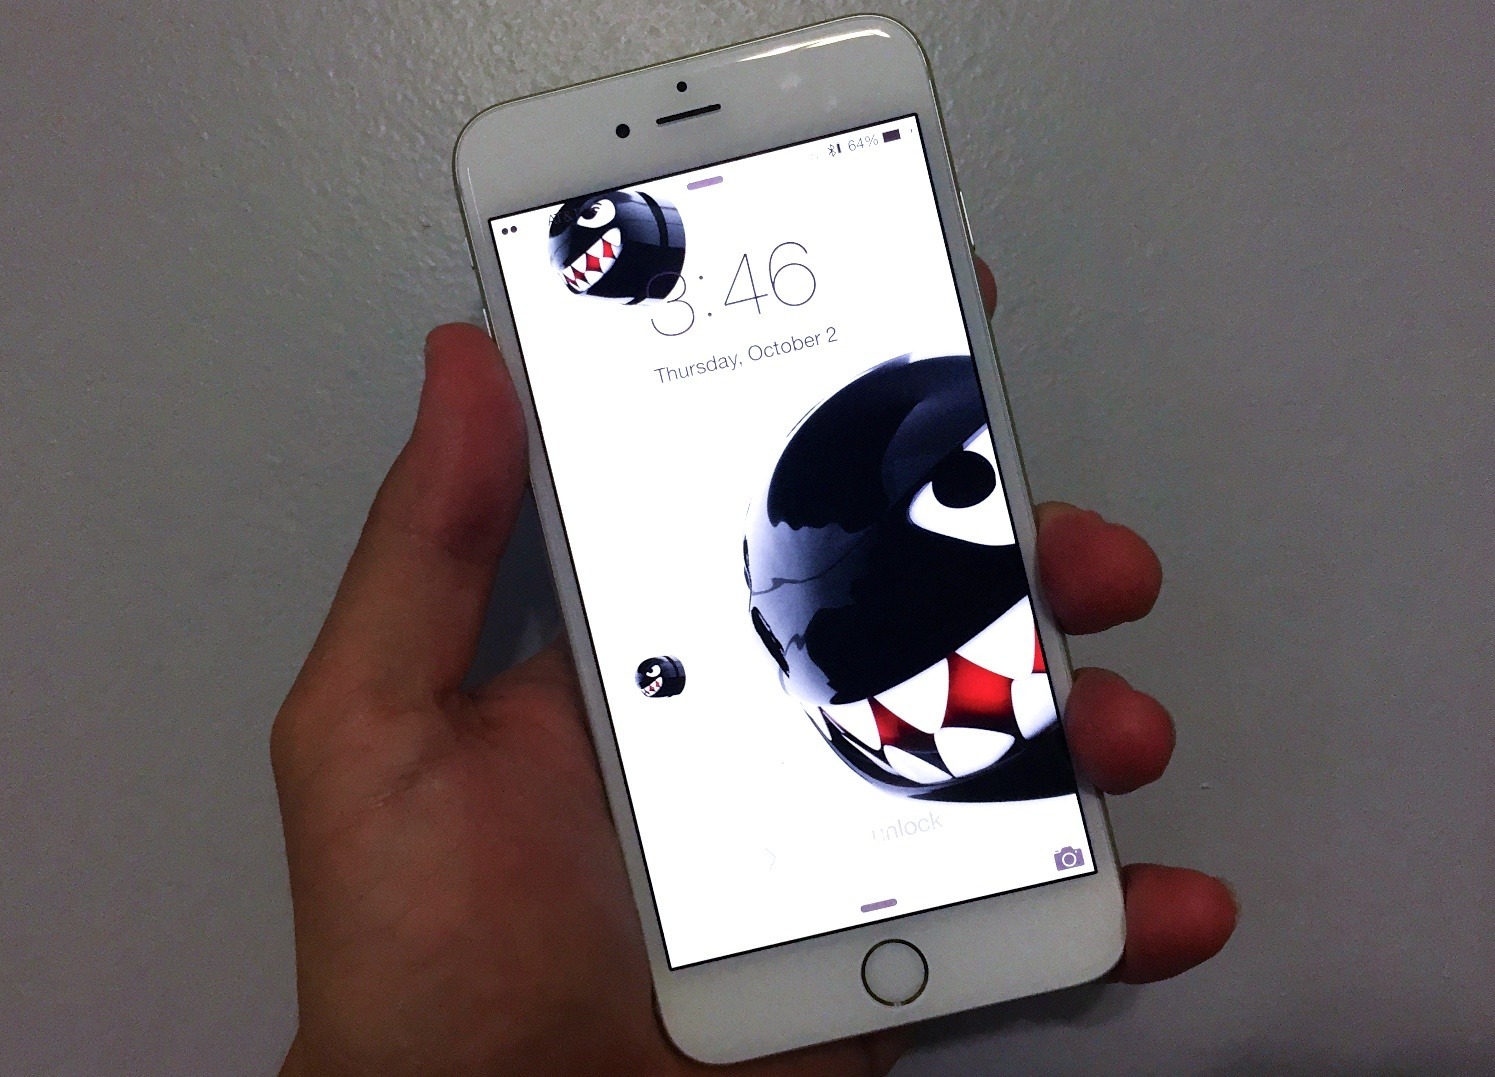 Here's a collection of over 1,000 amazing iPhone 6 Plus wallpapers.